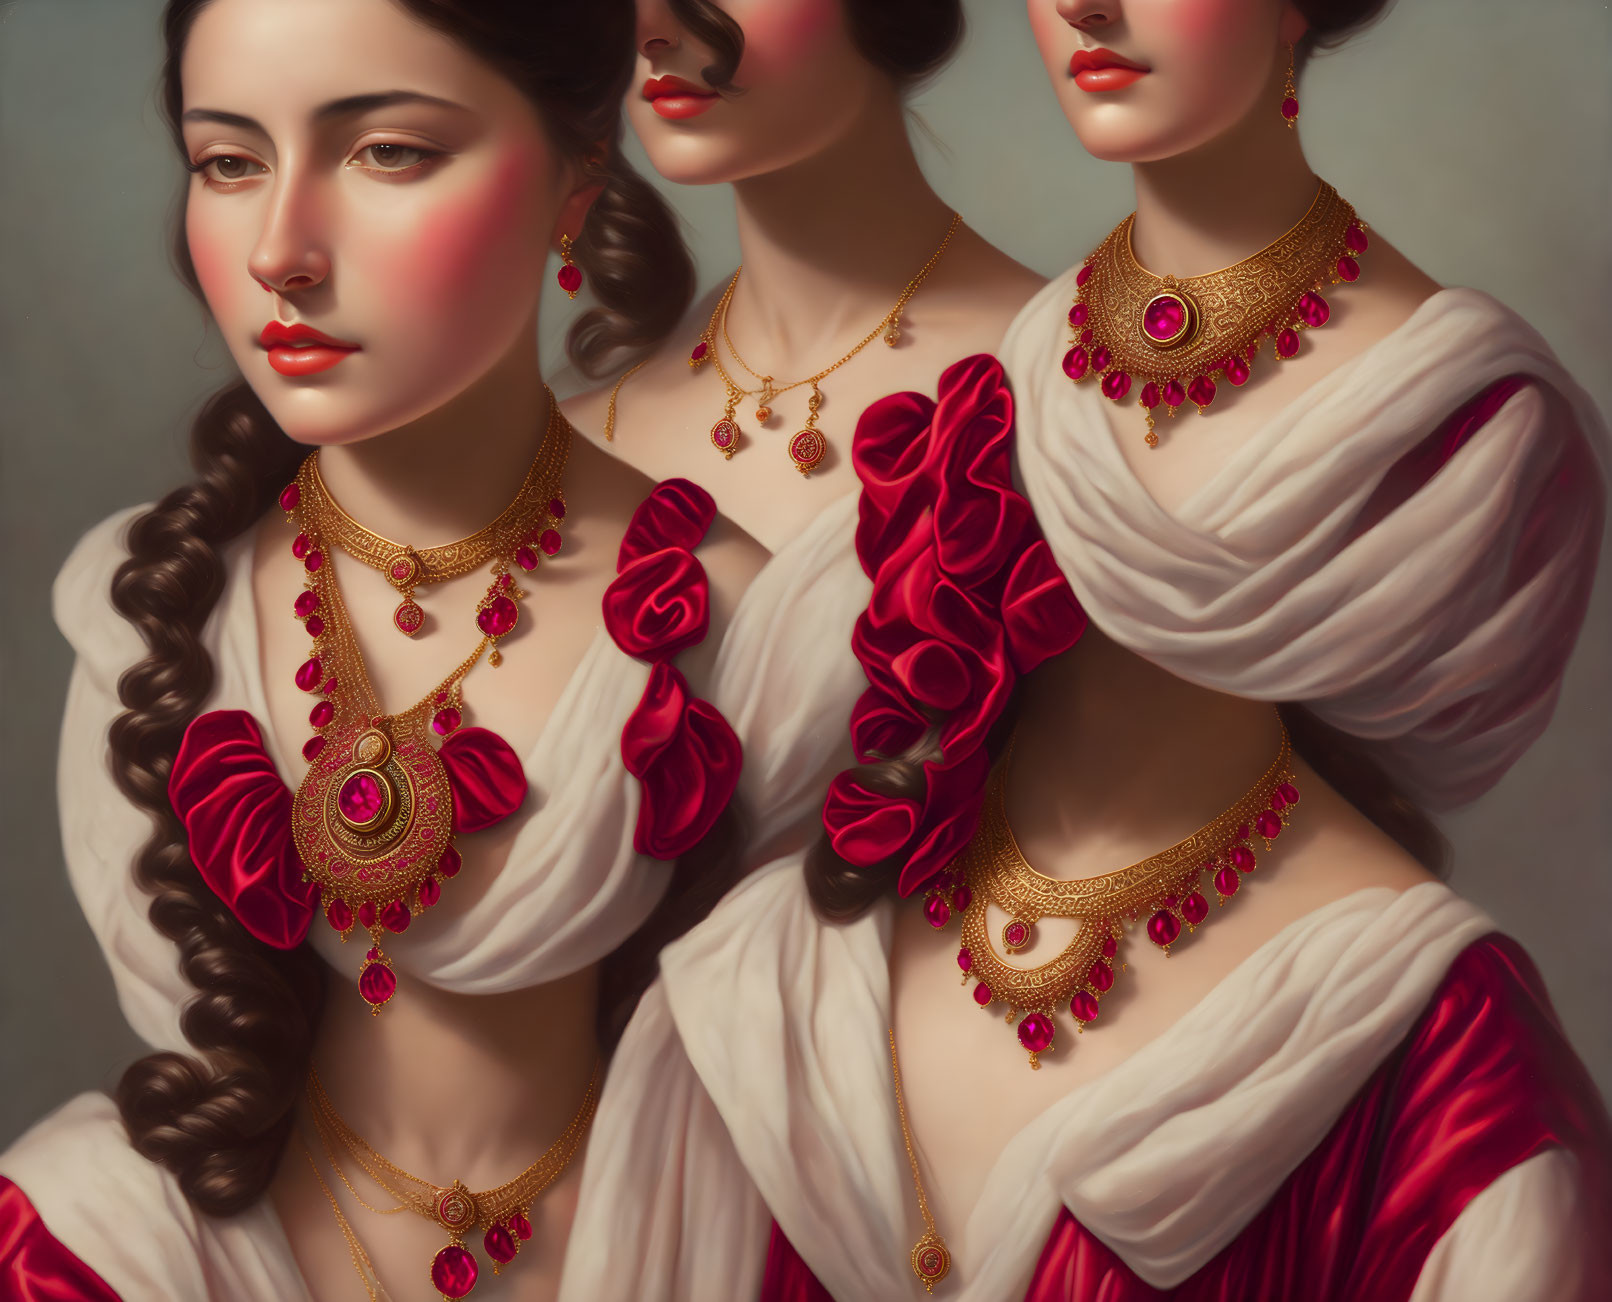 Three Women in Elaborate Gold Jewelry and White Drapery with Red Flowers